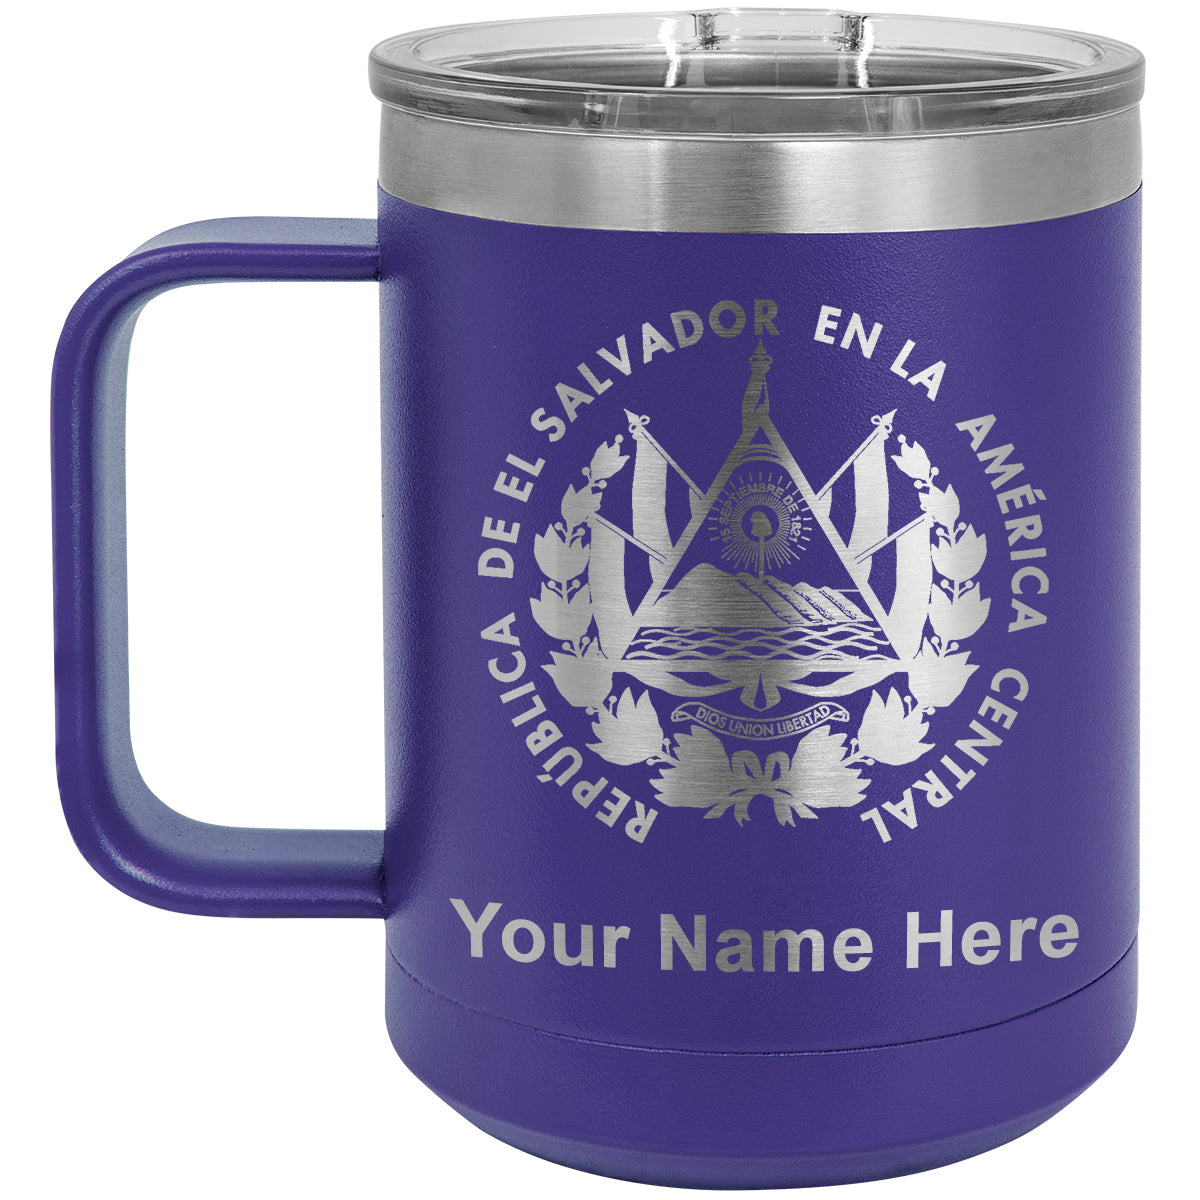 15oz Vacuum Insulated Coffee Mug, Flag of El Salvador, Personalized Engraving Included